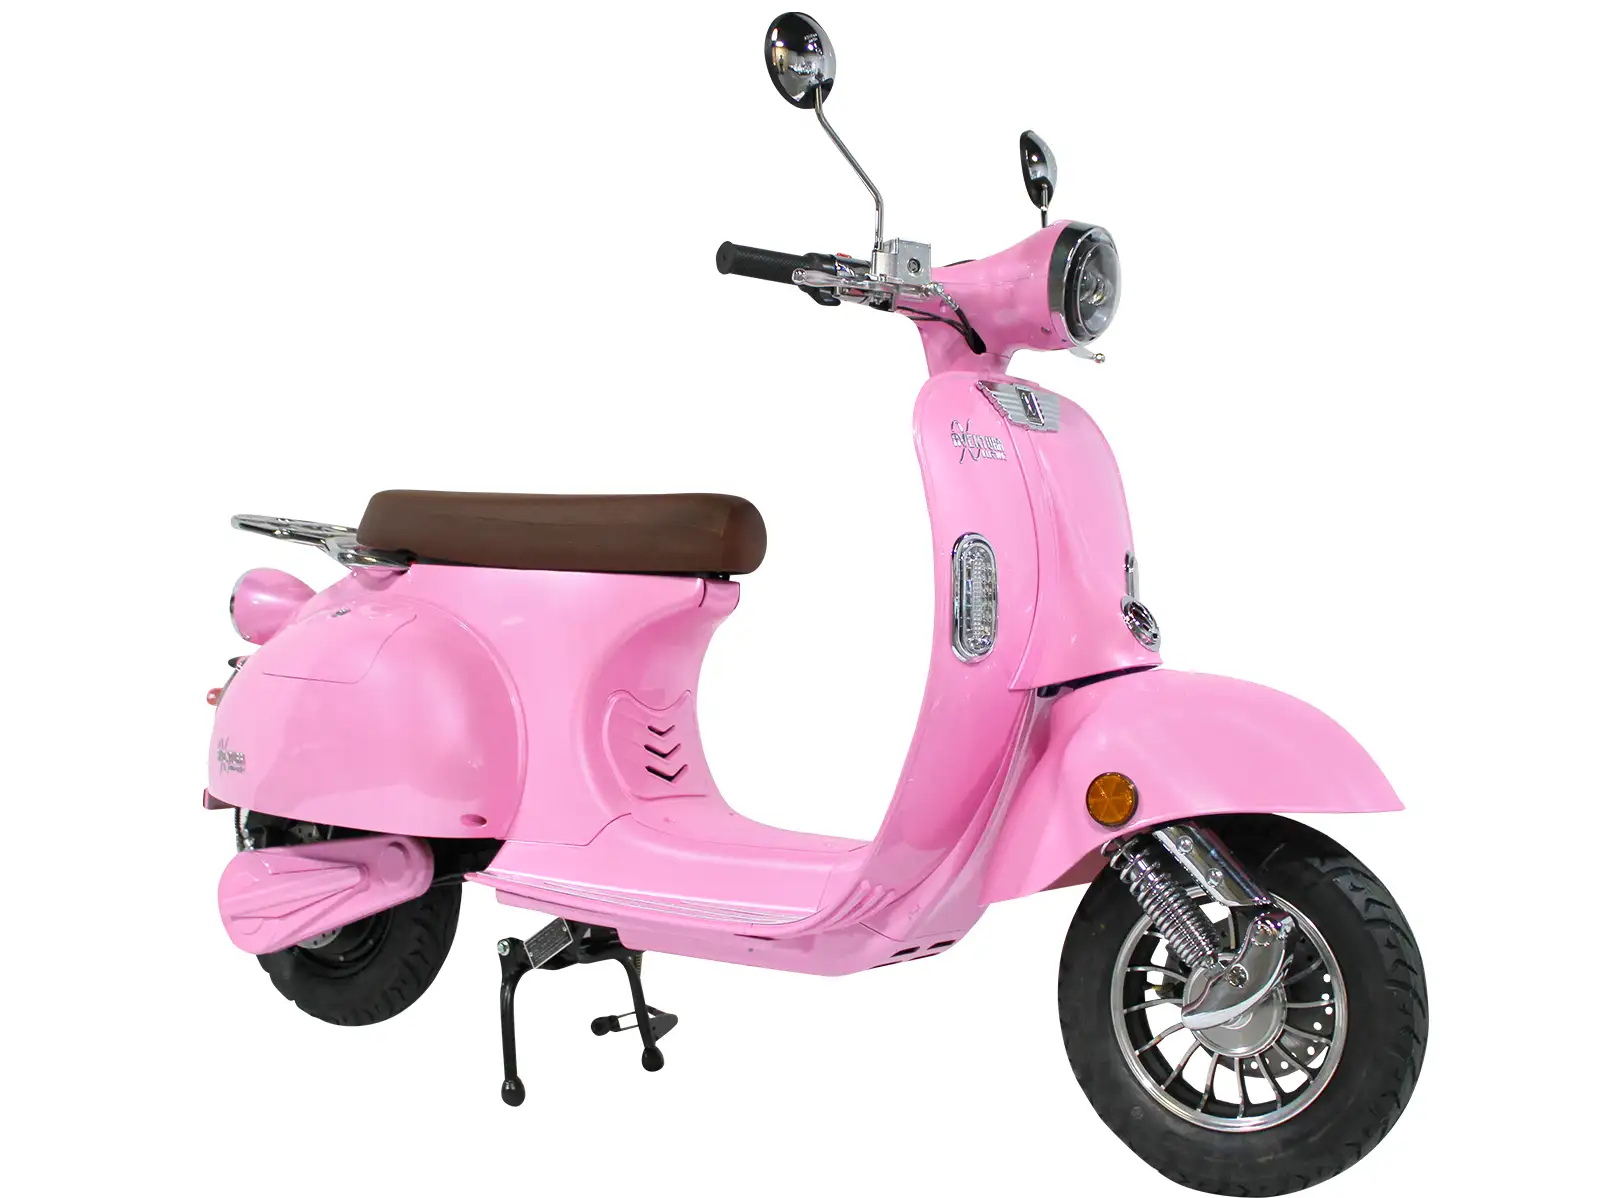 Aventura-X Electric Rose Pink Limited Edition (In Stock)